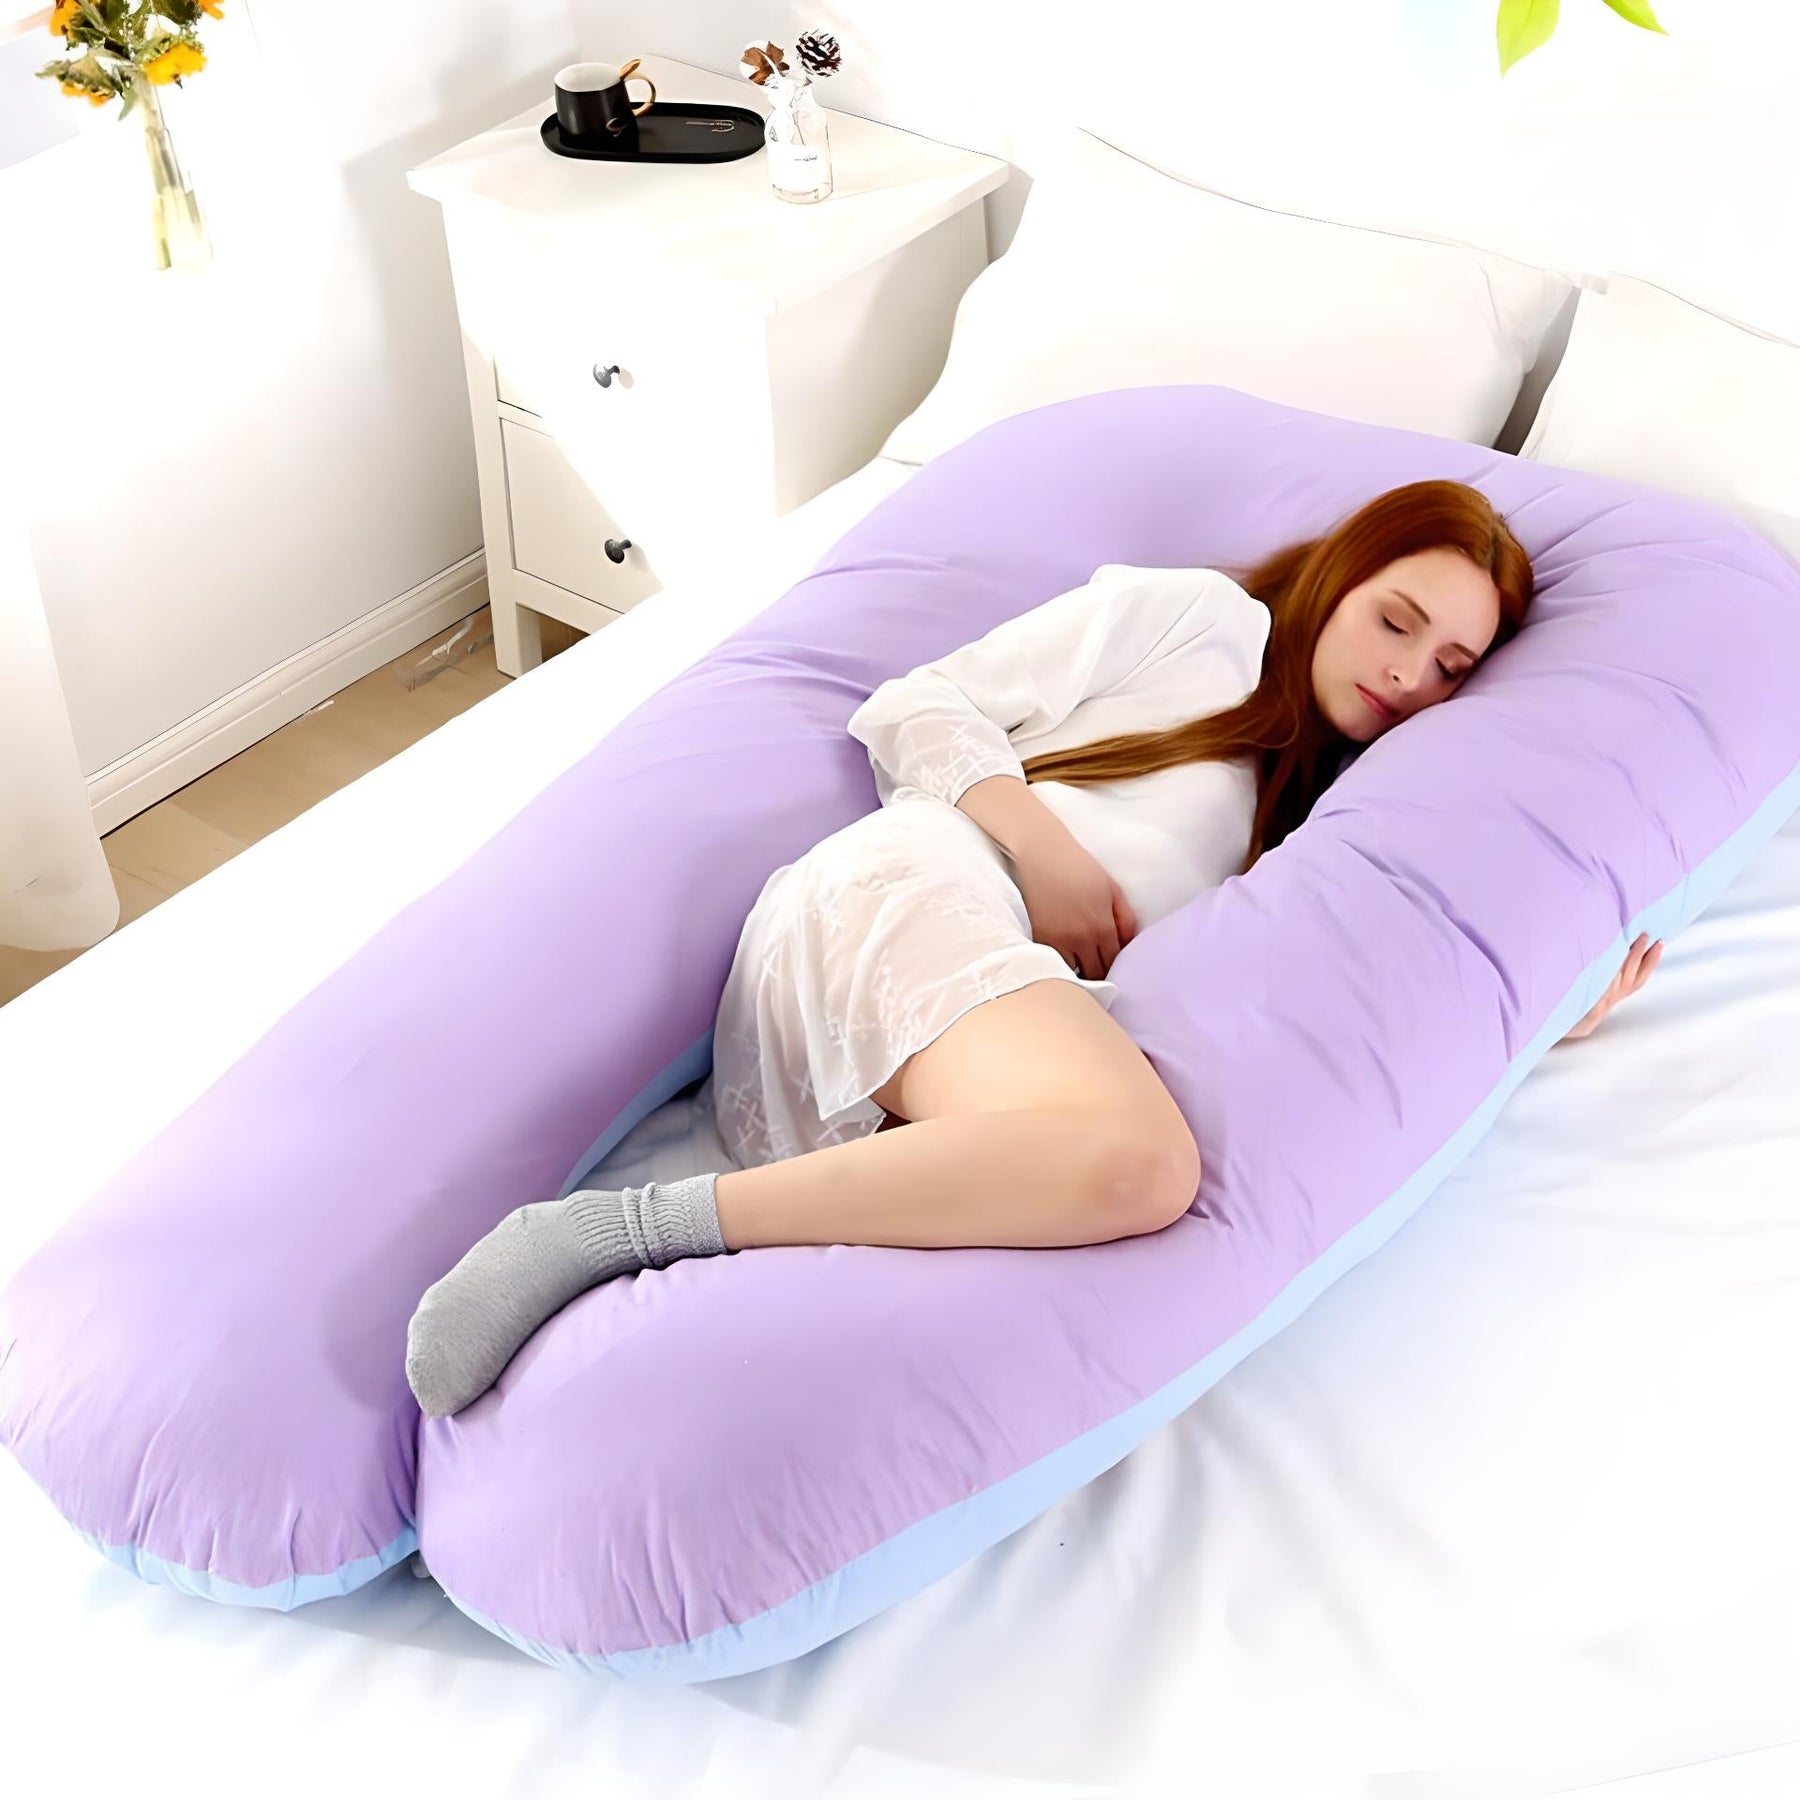 Sleep Soundly with the Full Support Body Pillow: Relief for Maternity, Shoulder, and Back Pain - Gear Elevation